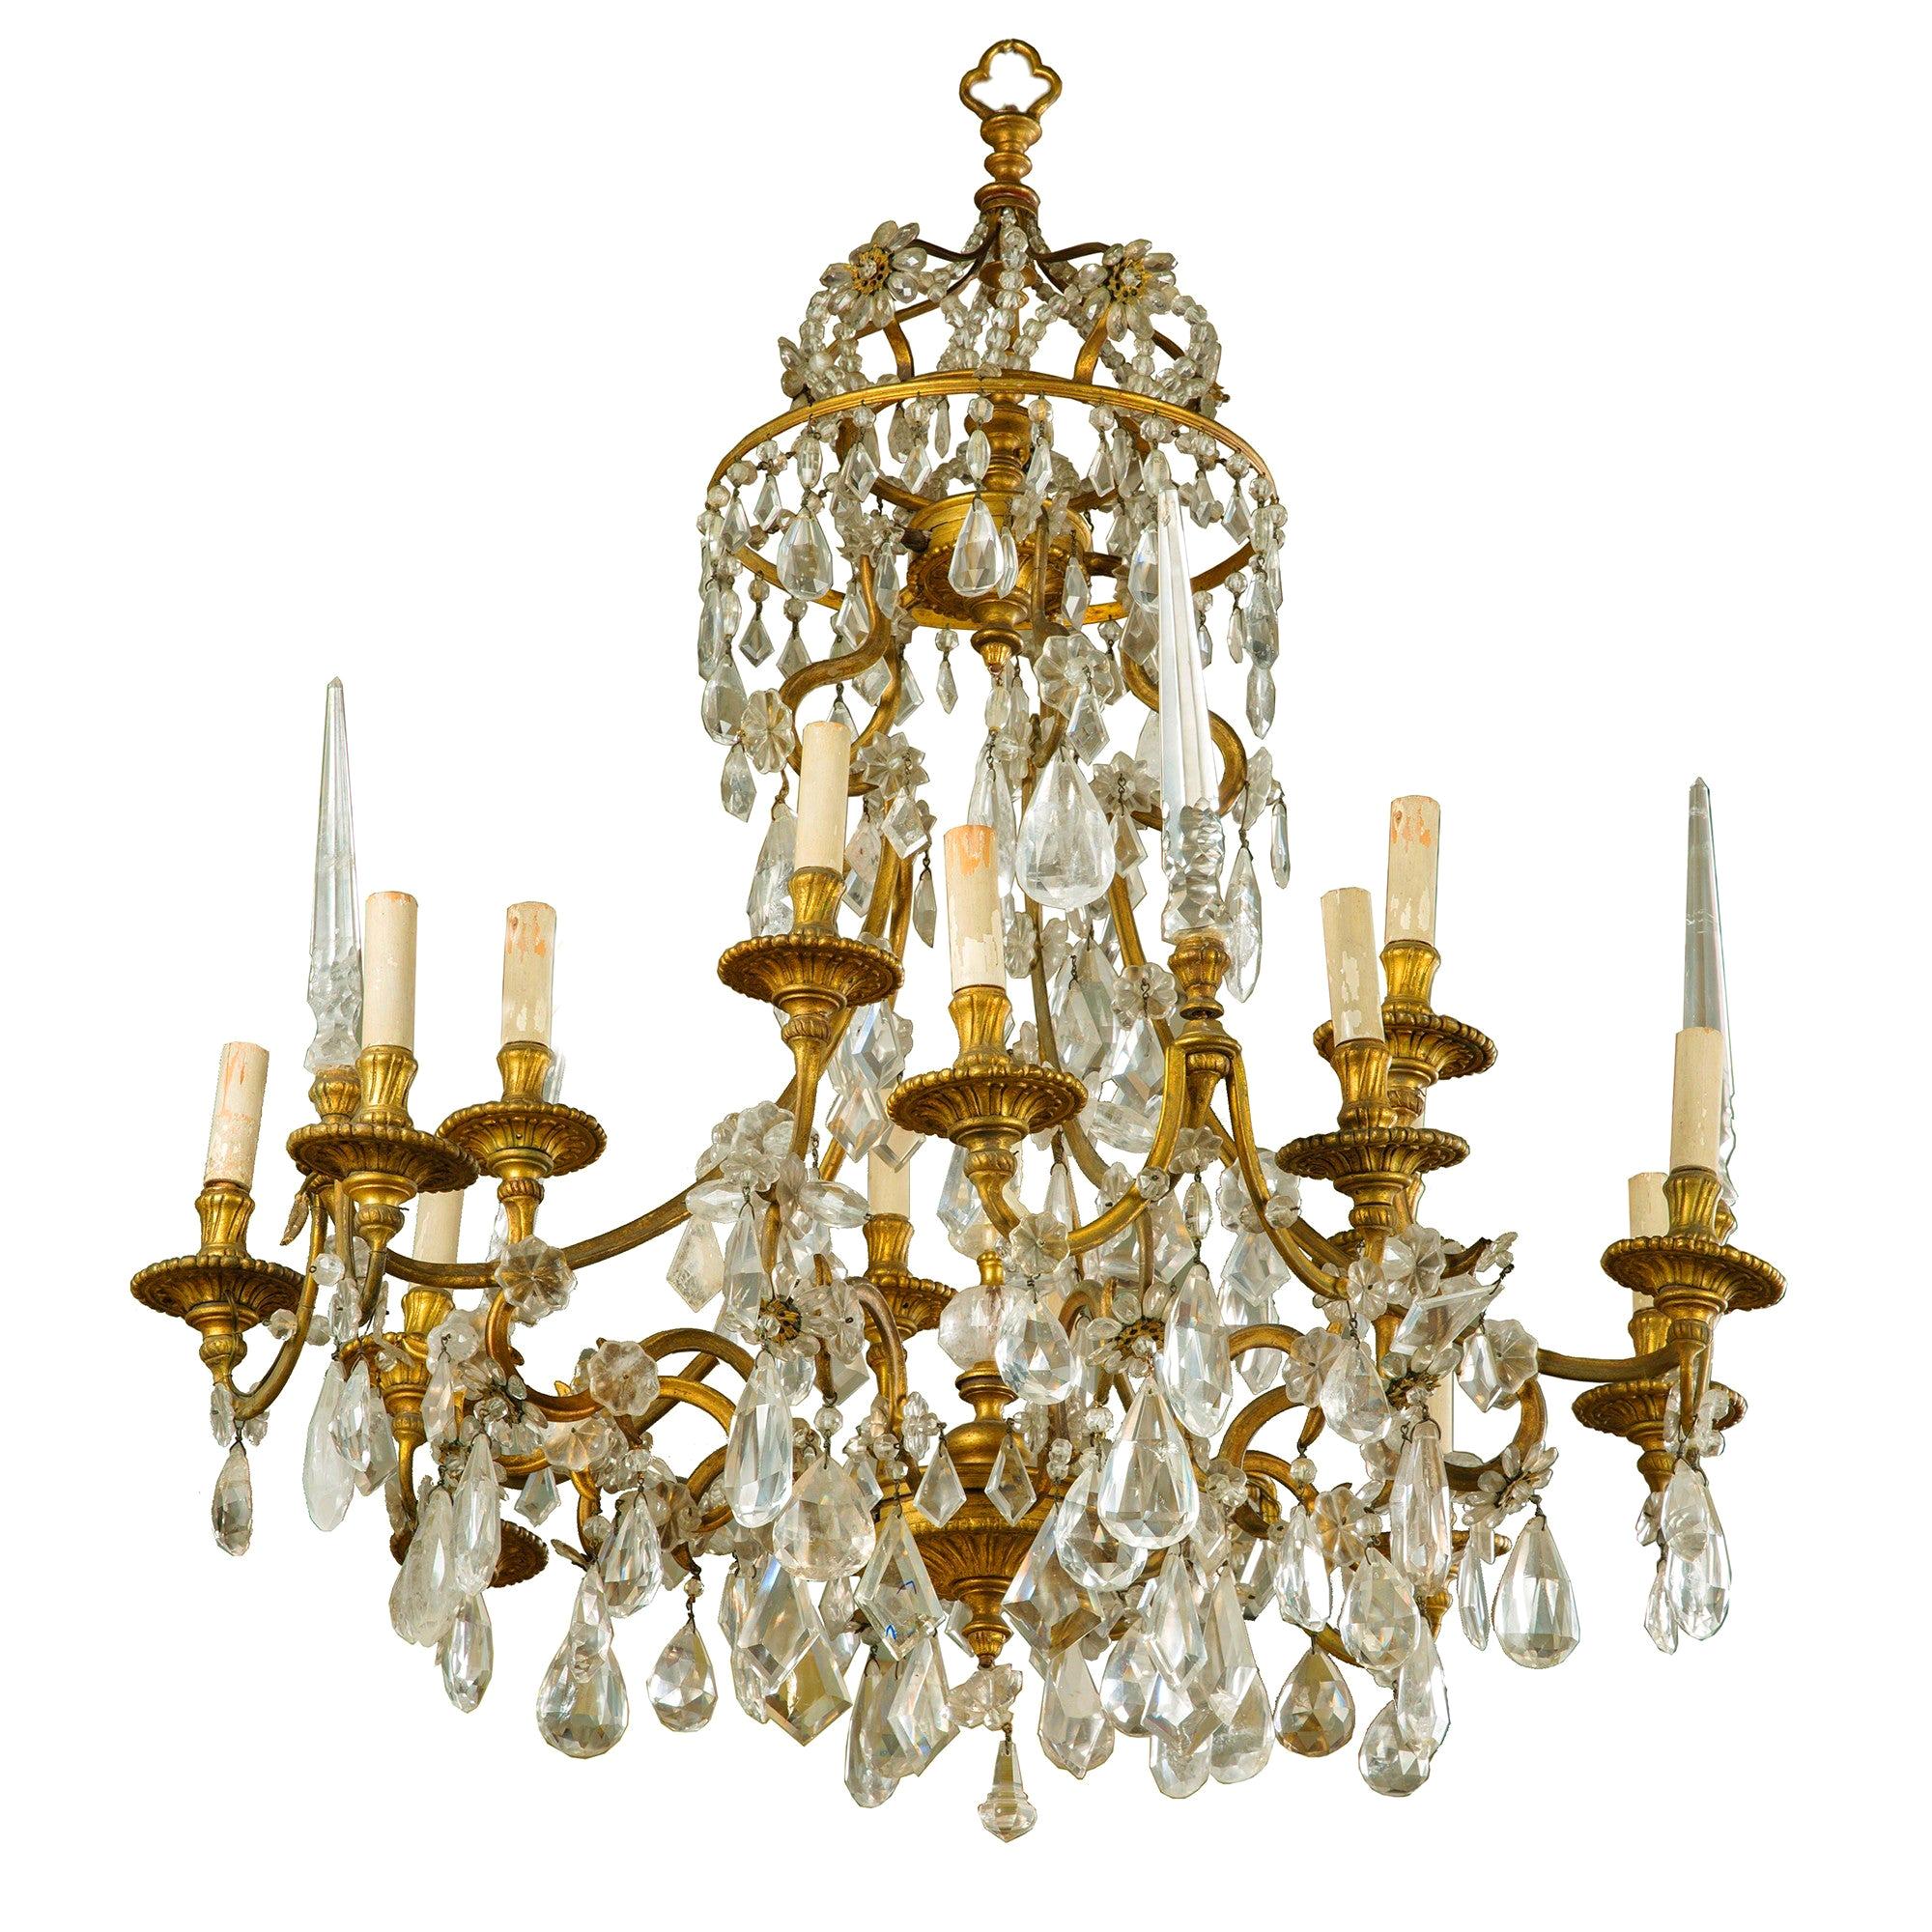 19th Century Gilt Bronze and Rock Crystal French Chandelier